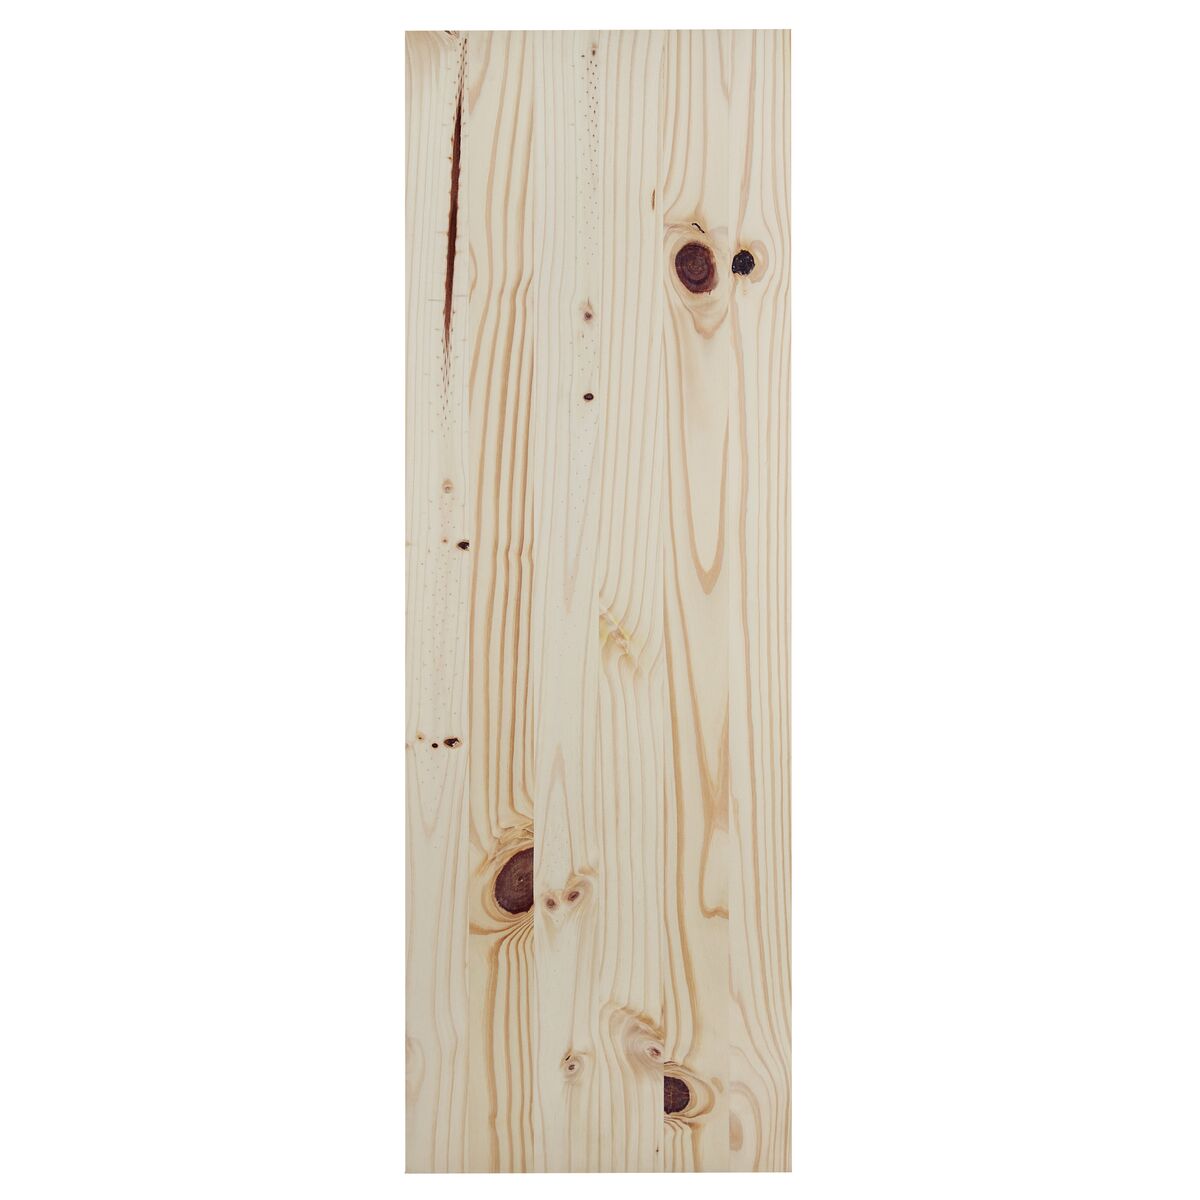 Tramontina Modulare CC 600x300x18 mm Pine Wood Panel with a Natural Finish